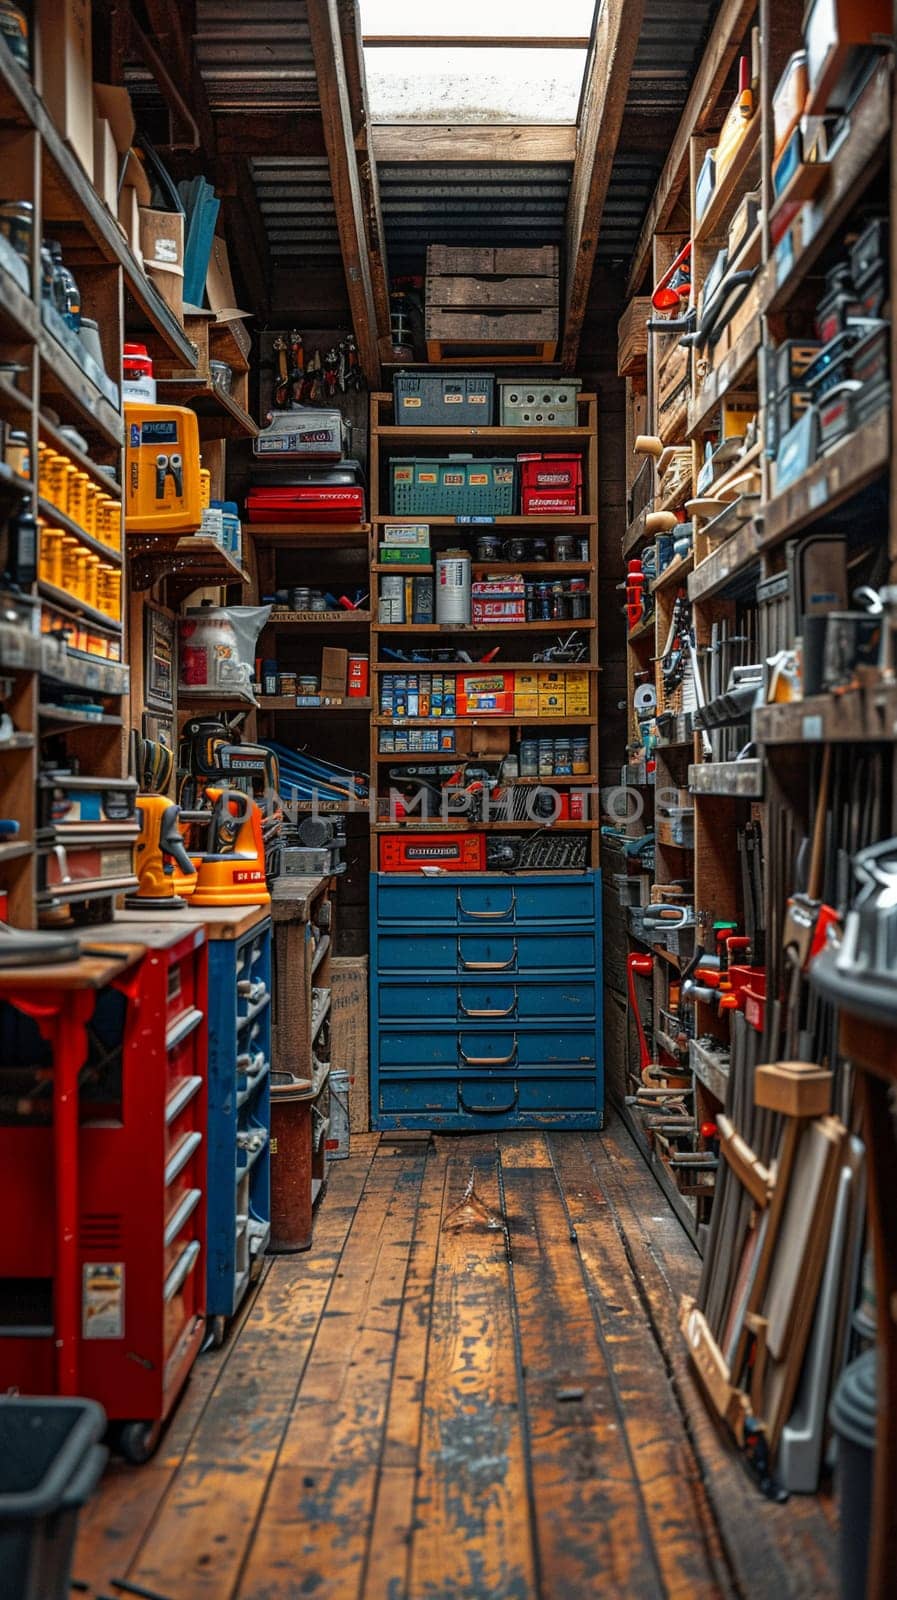 Hardware Store Aisles Offer Tools for Home Business Improvements by Benzoix